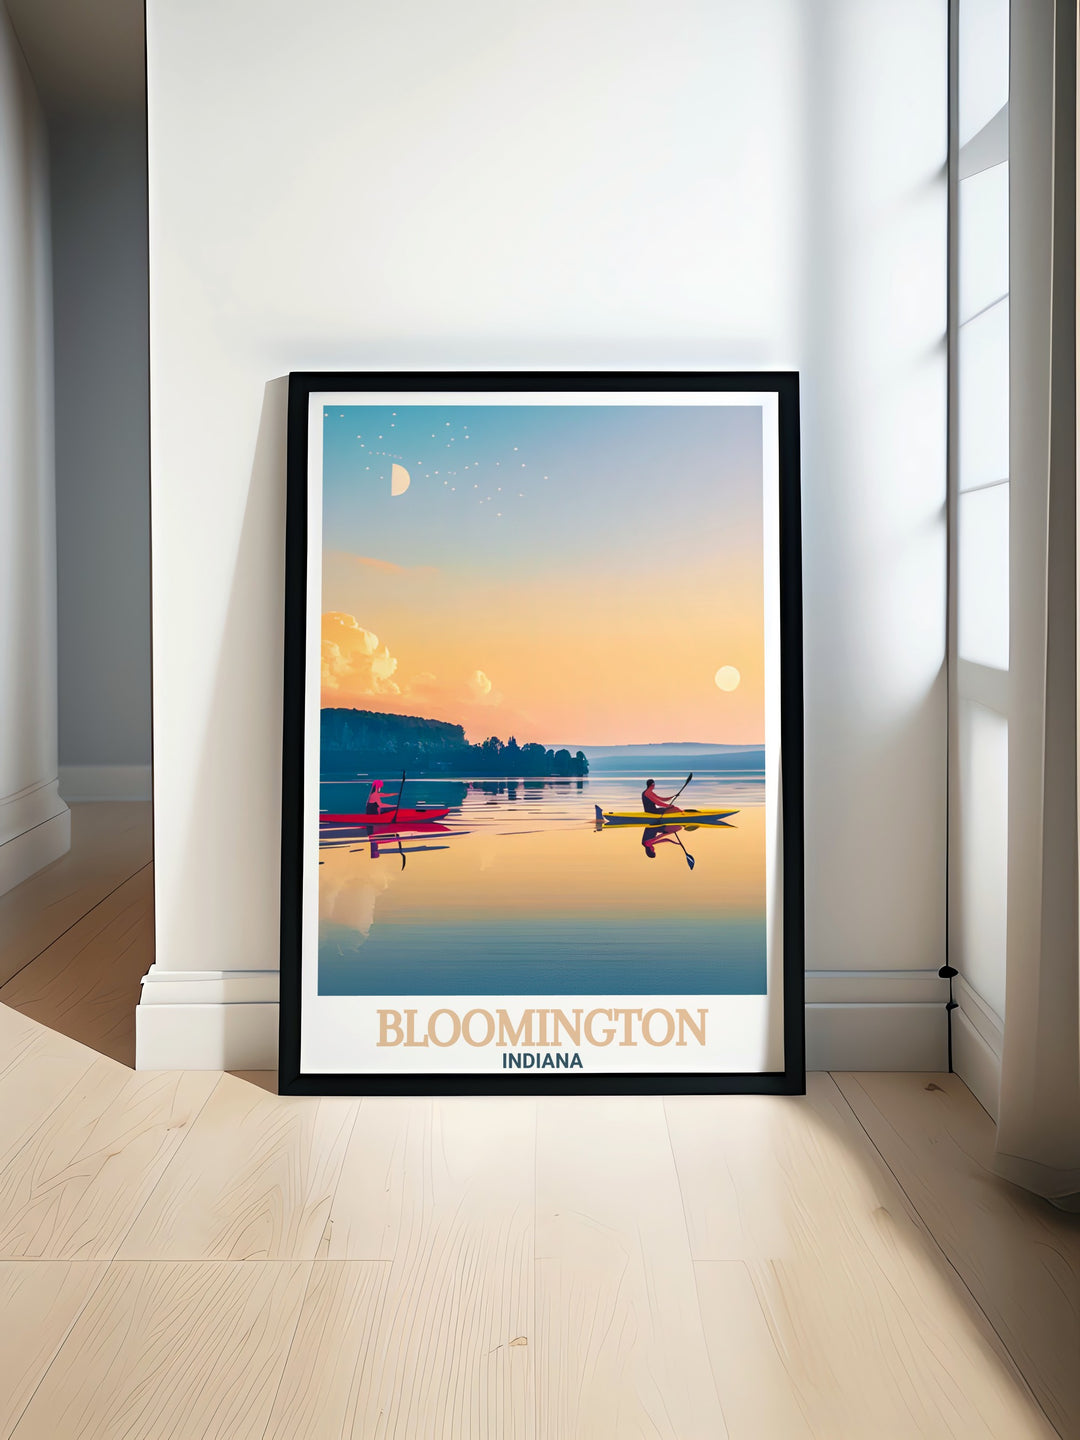 Lake Monroe vintage poster showcasing the serene and picturesque landscape of Bloomington Indiana with tranquil waters and lush surroundings perfect for home decor and personalized gifts with a vibrant color palette highlighting the natural beauty of the area